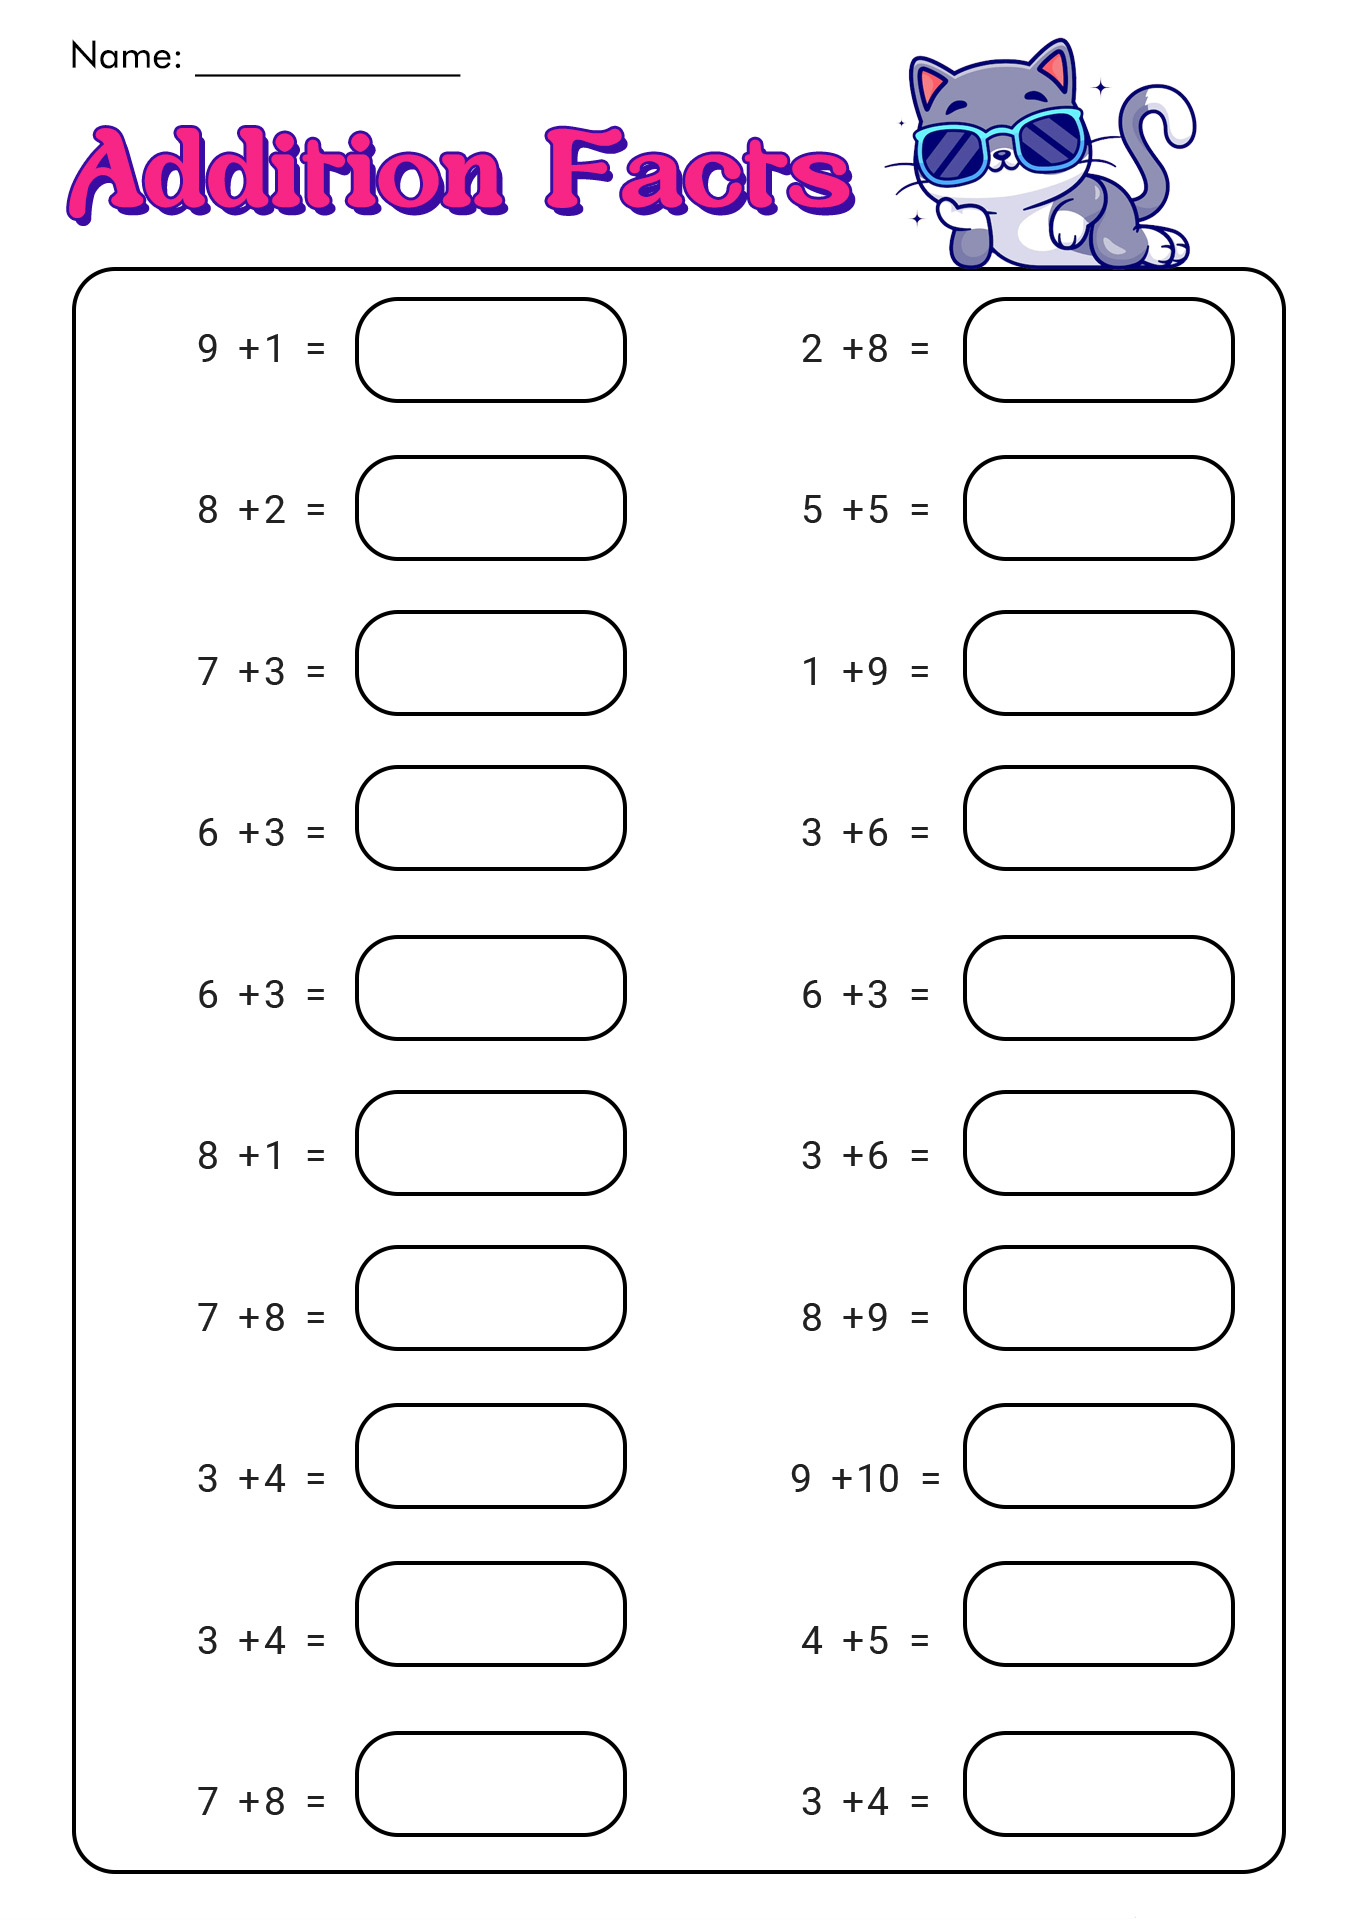 Addition Facts Worksheets Image